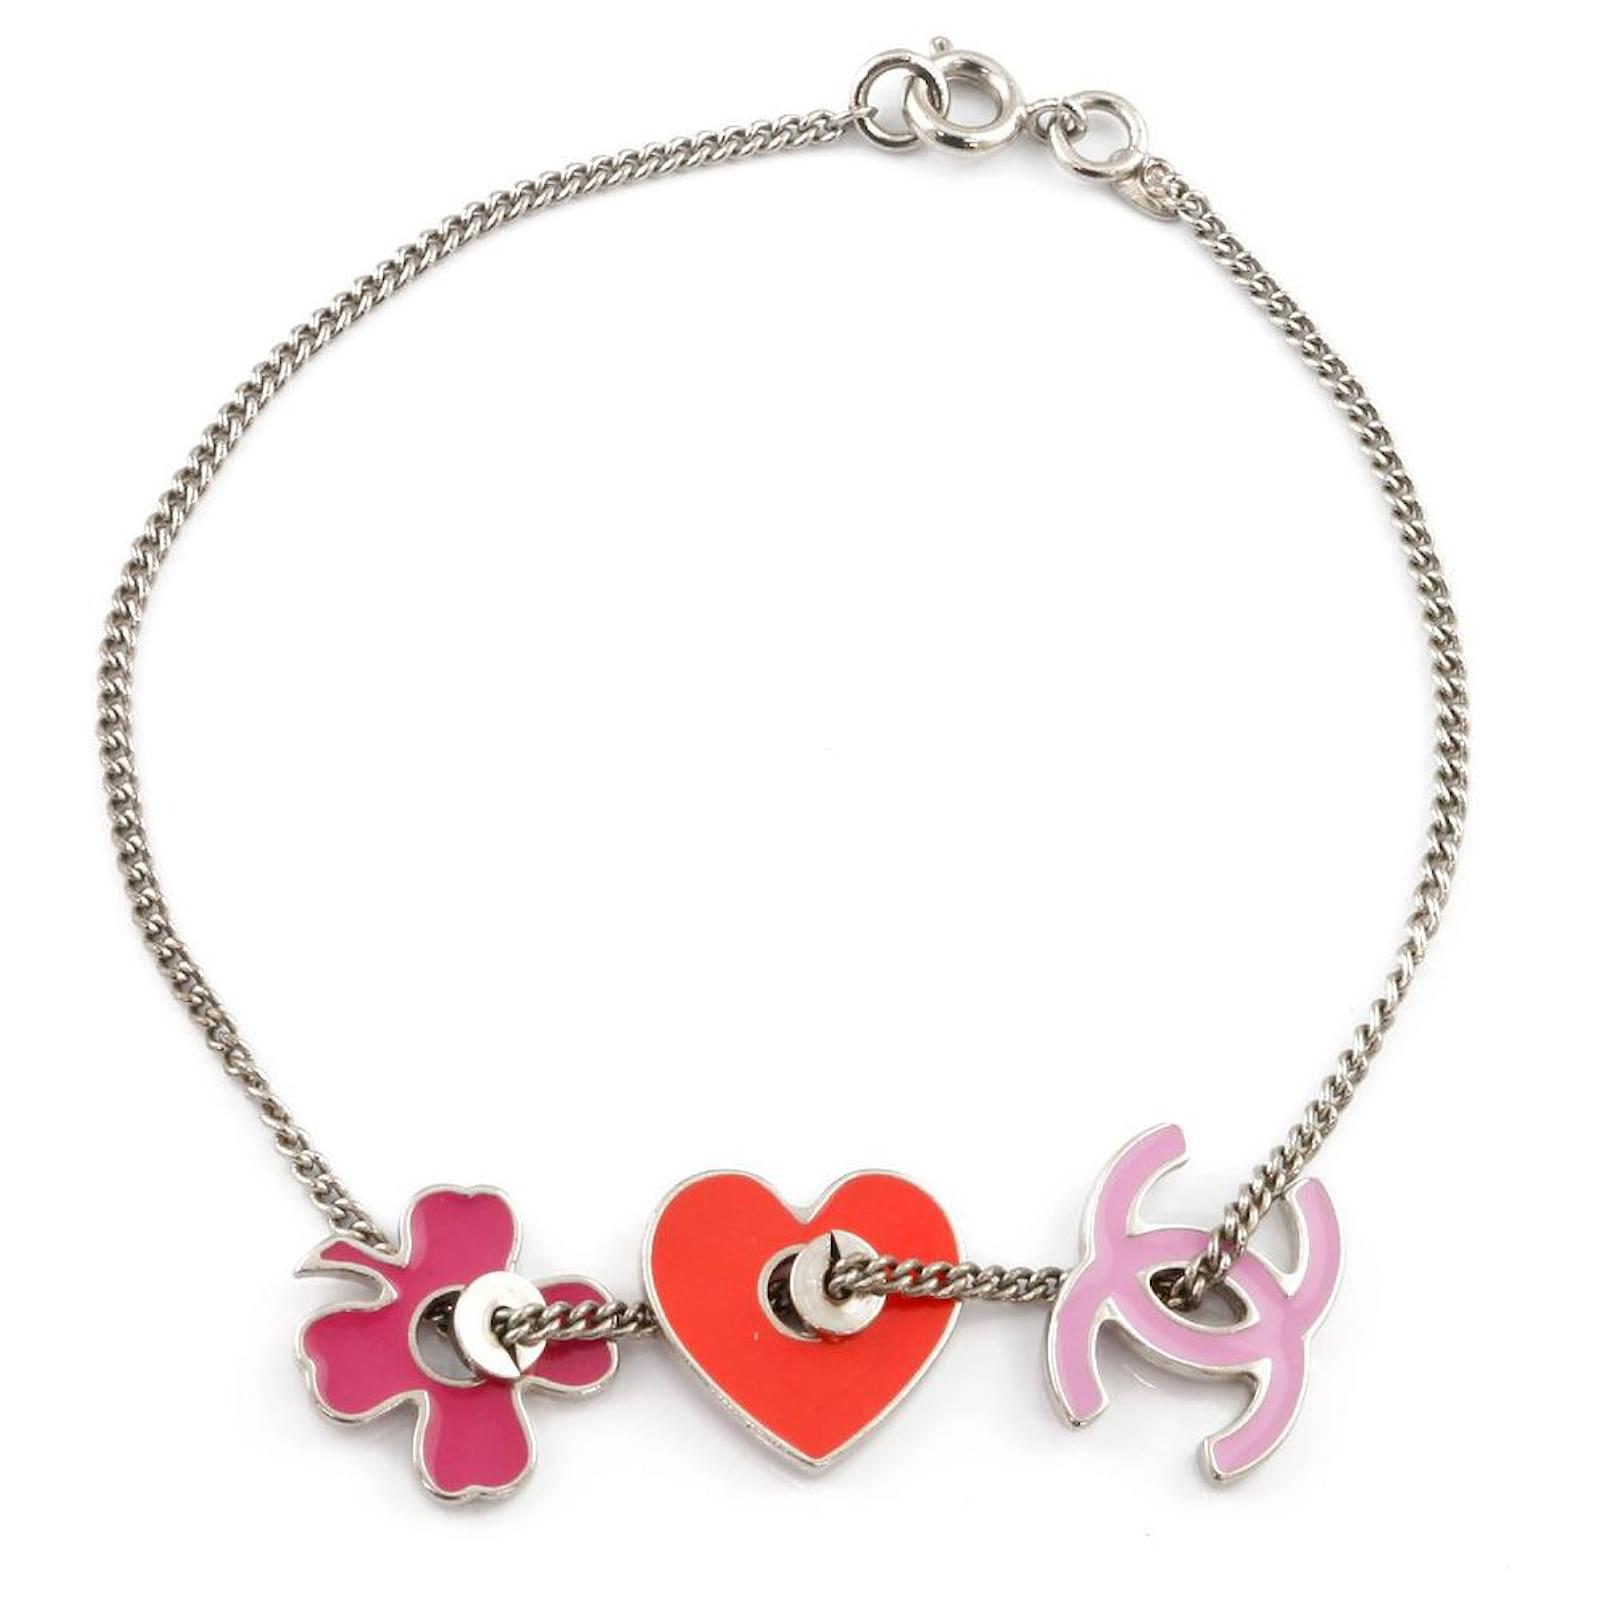 Chanel Bracelet Coco Mark Heart Clover Silver Pink Red Ladies